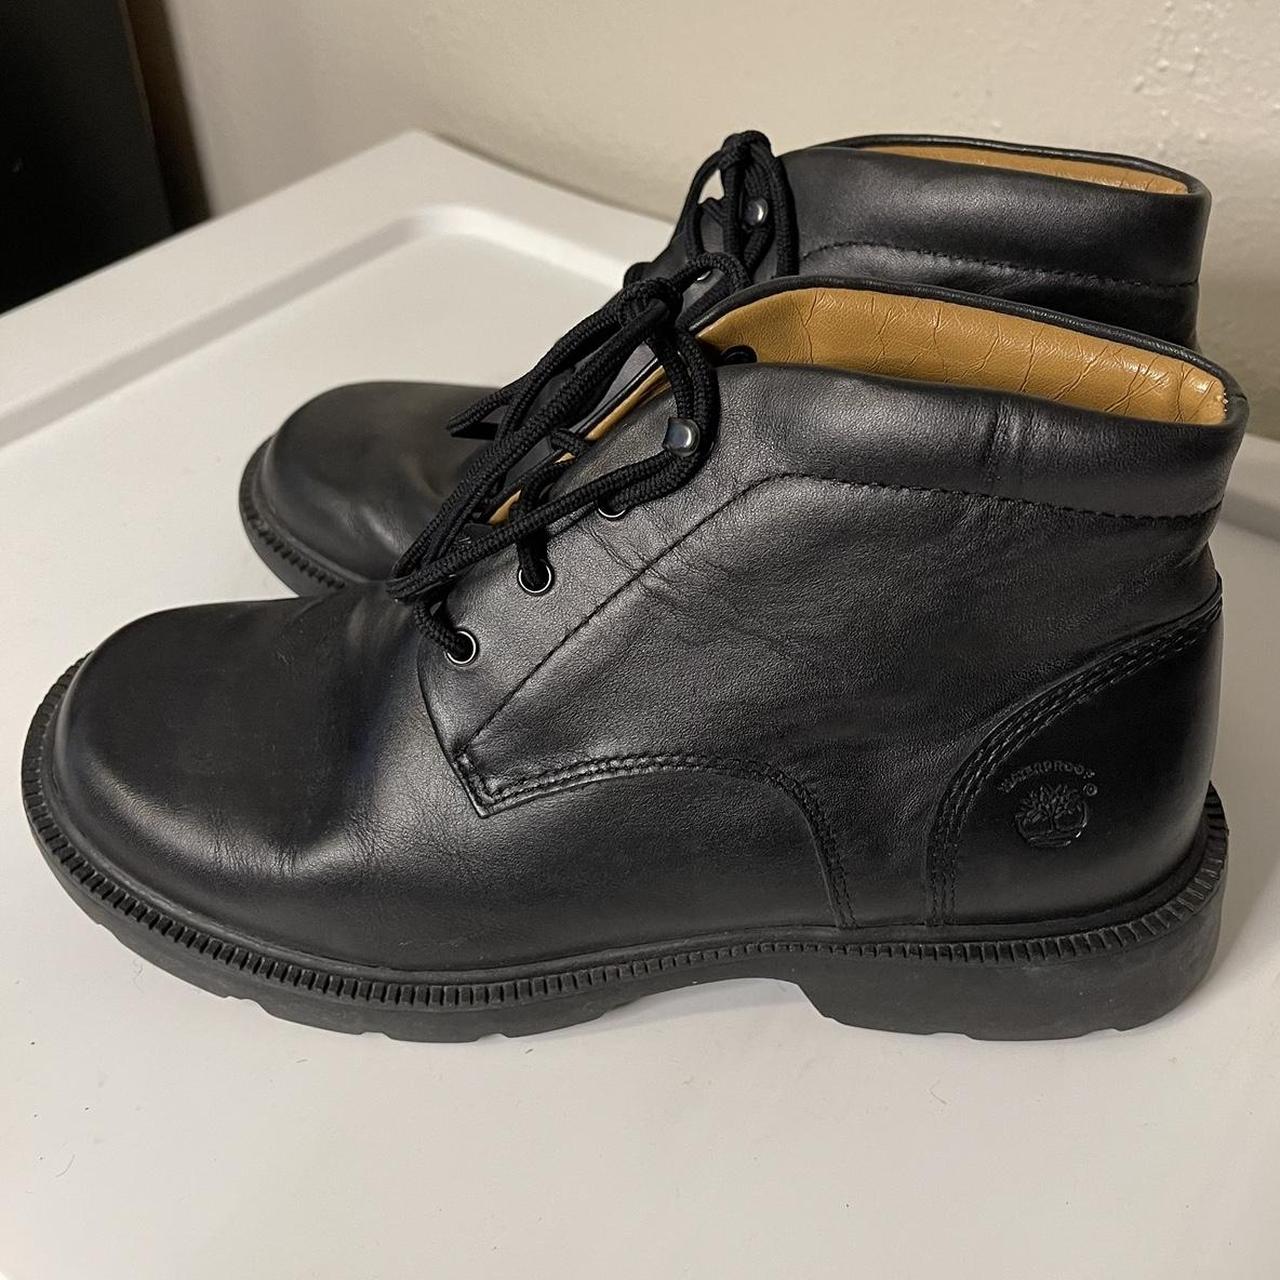 Timberland Smart Comfort System black boots. These... - Depop